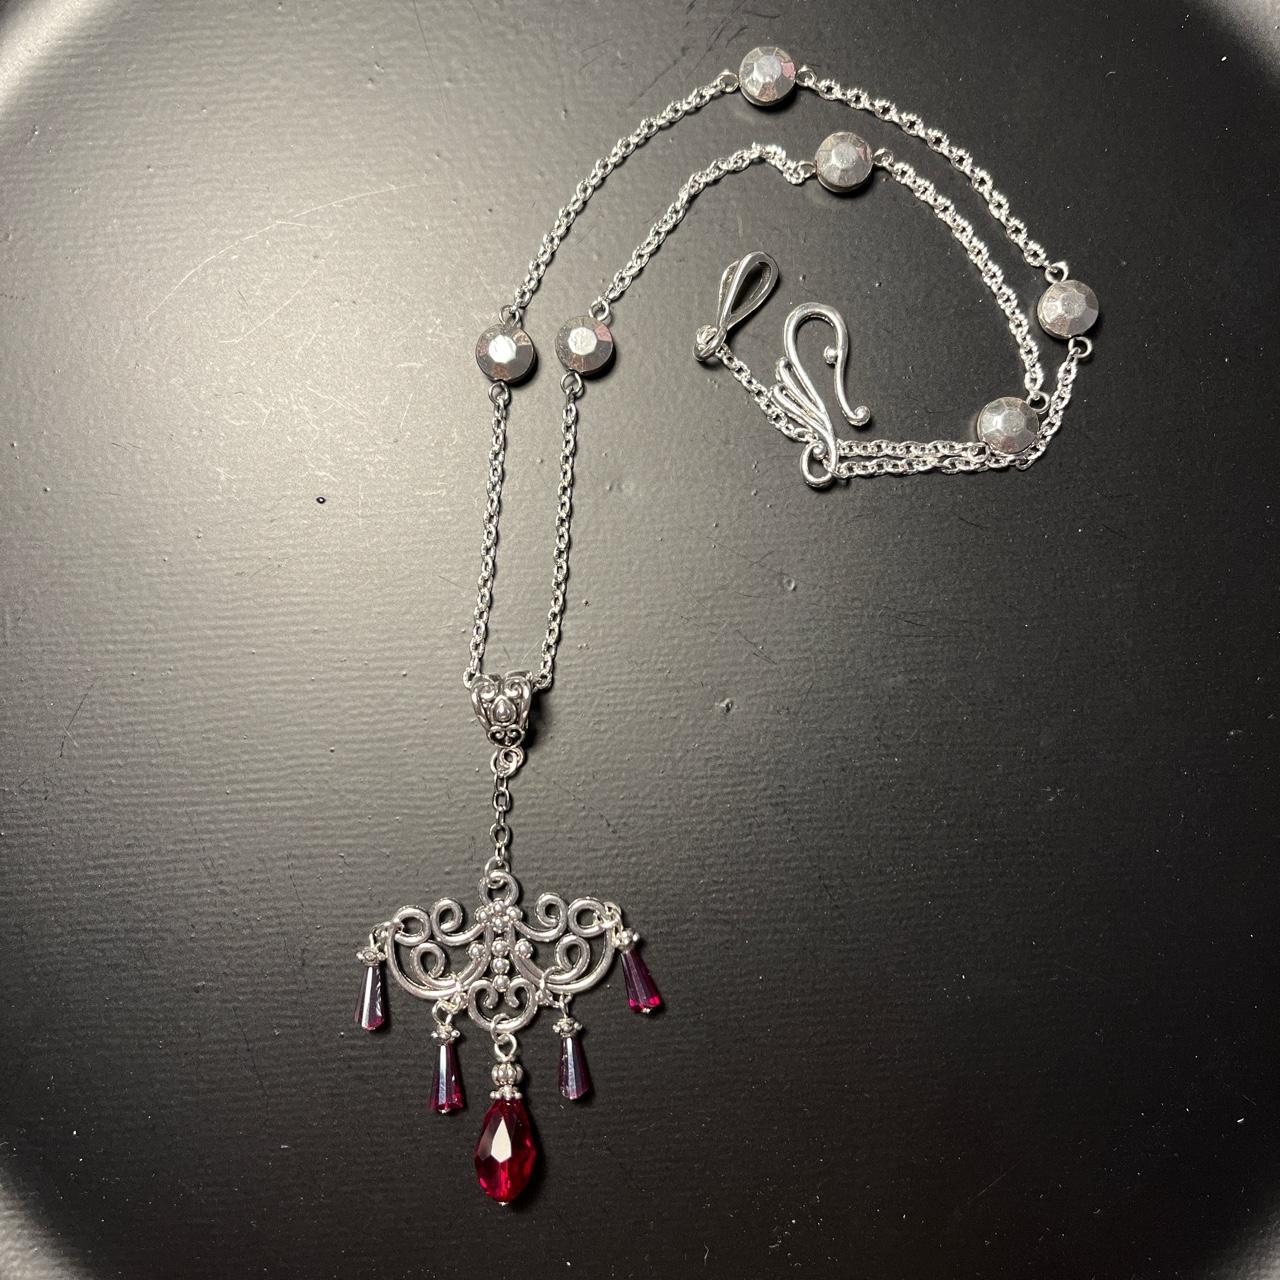 Product Image 1 - A chandelier necklace✨ It’s a